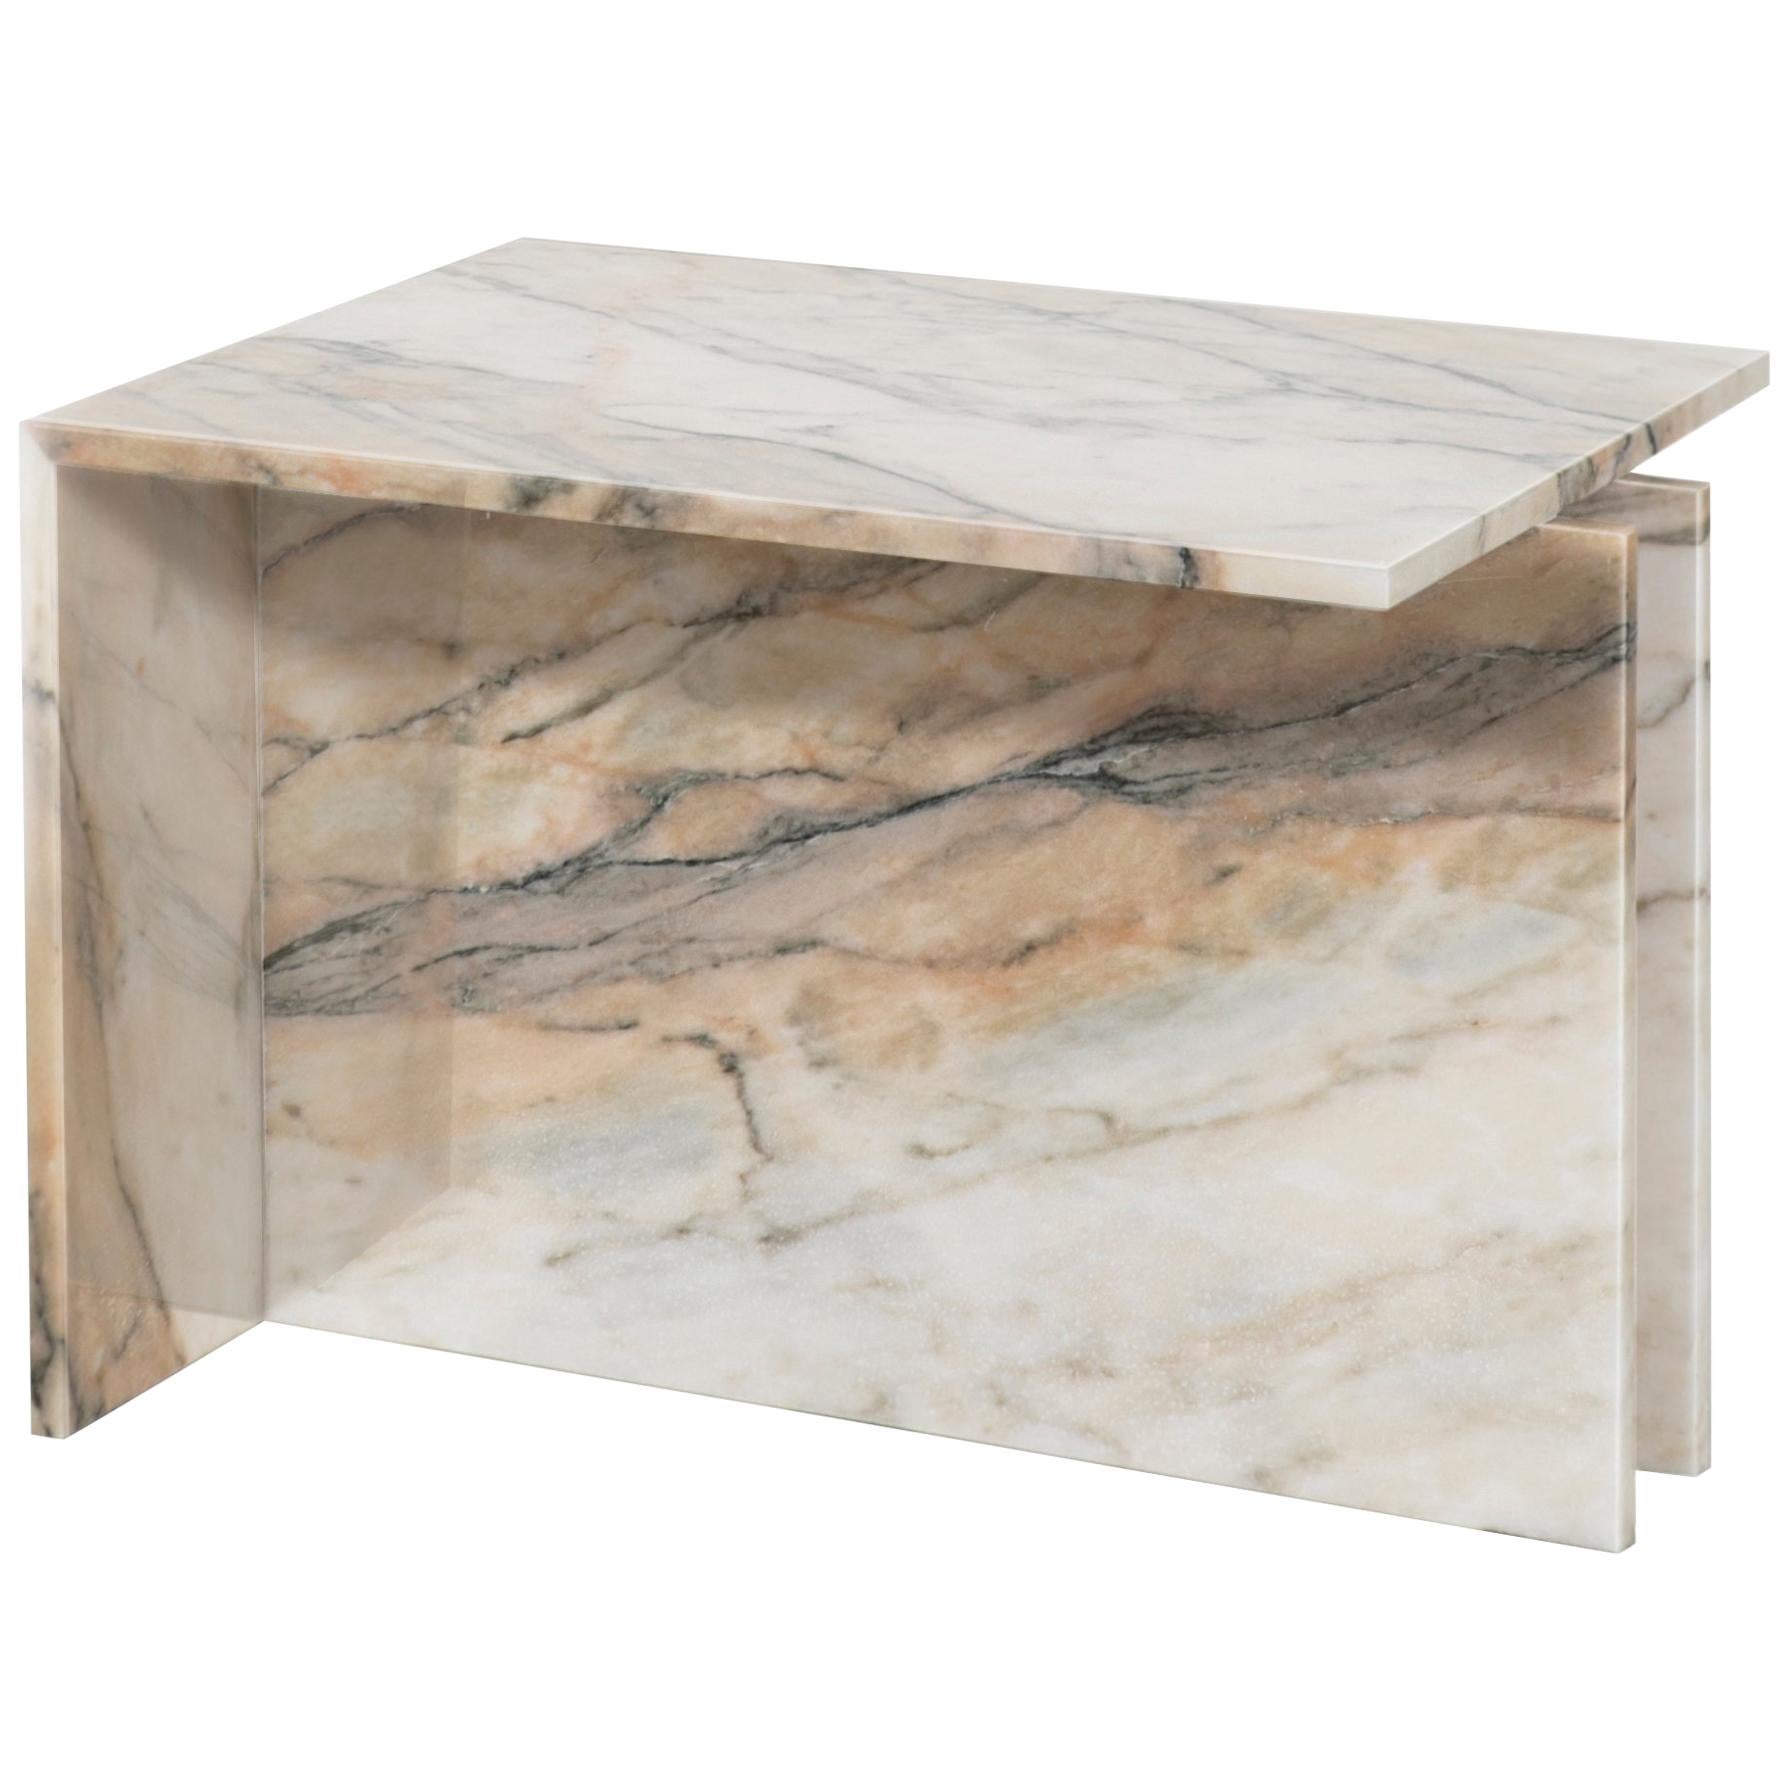 "Thè" Brazilian Contemporary Side Table or Coffee Table in Marble 